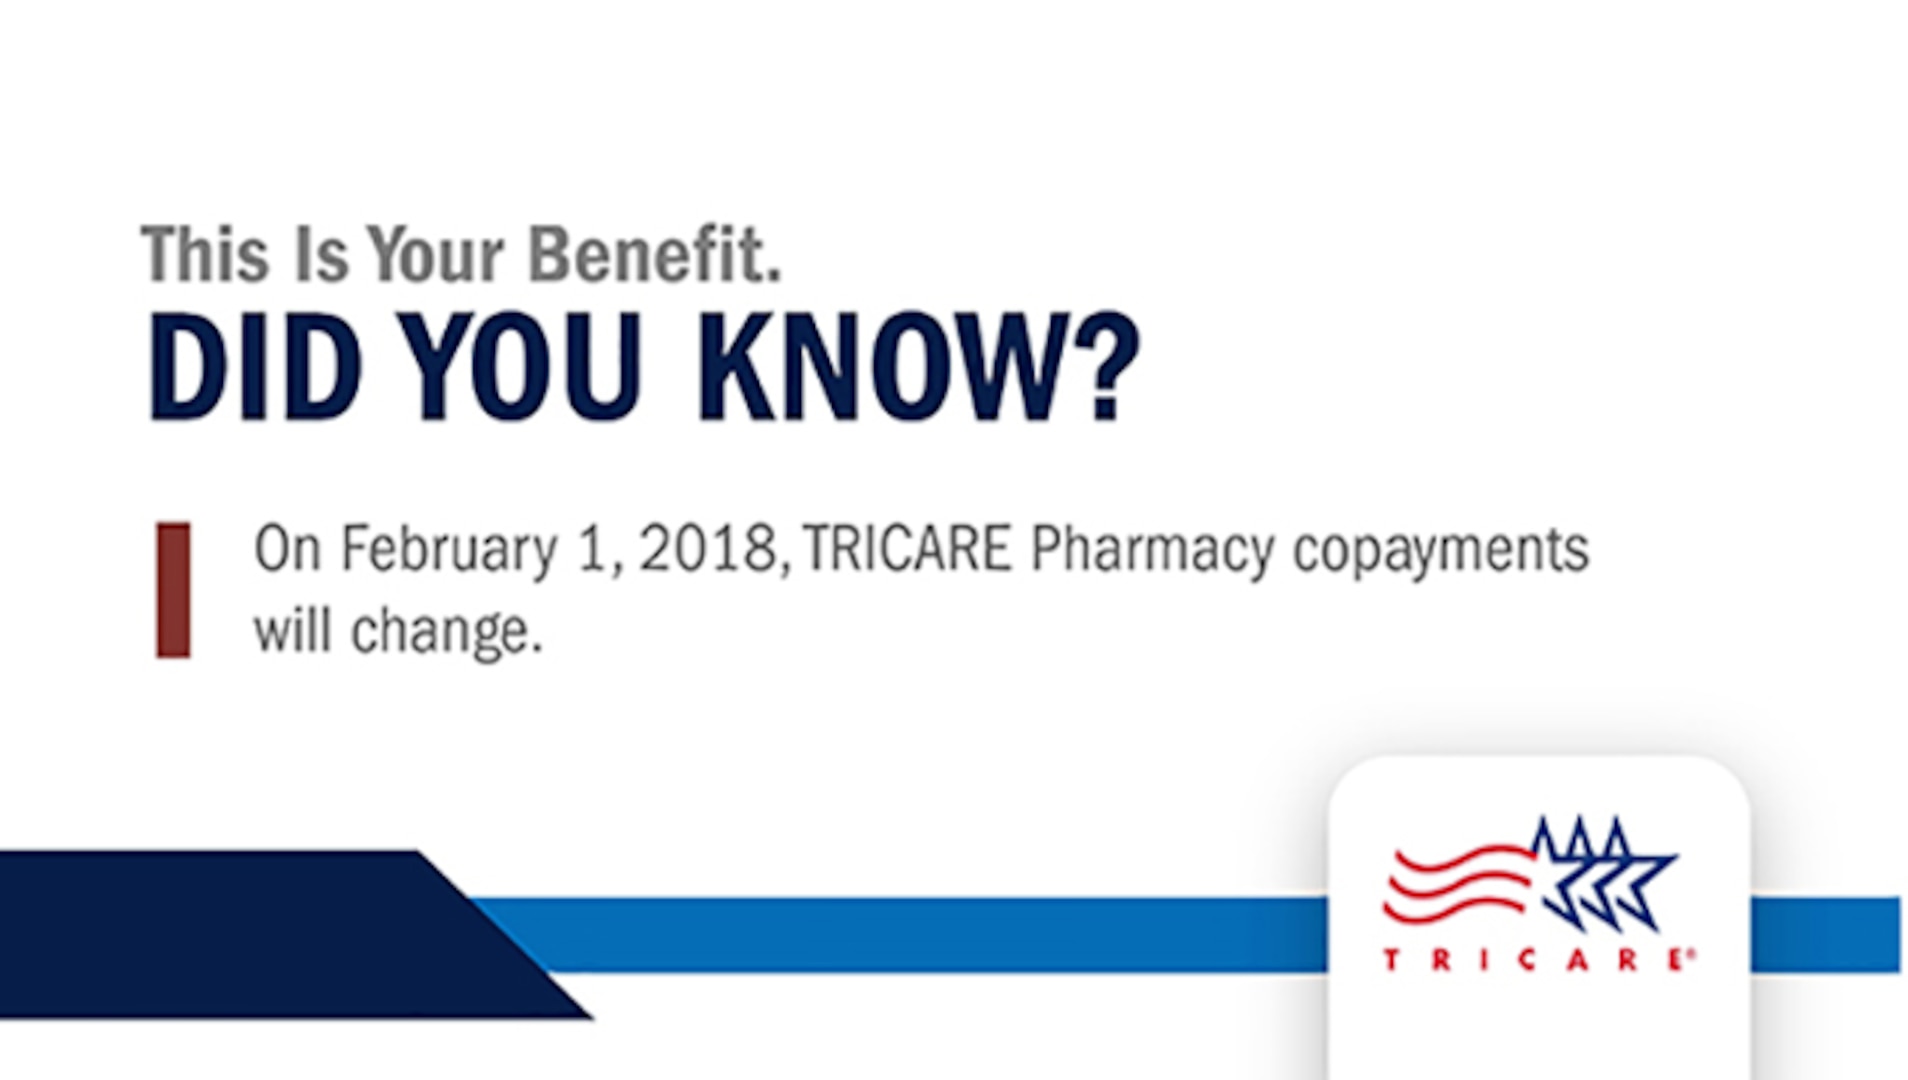 On Feb. 1, copayments for prescription drugs at TRICARE Pharmacy Home Delivery and retail pharmacies increased. These changes are required by law and affect TRICARE beneficiaries who are not active duty service members.